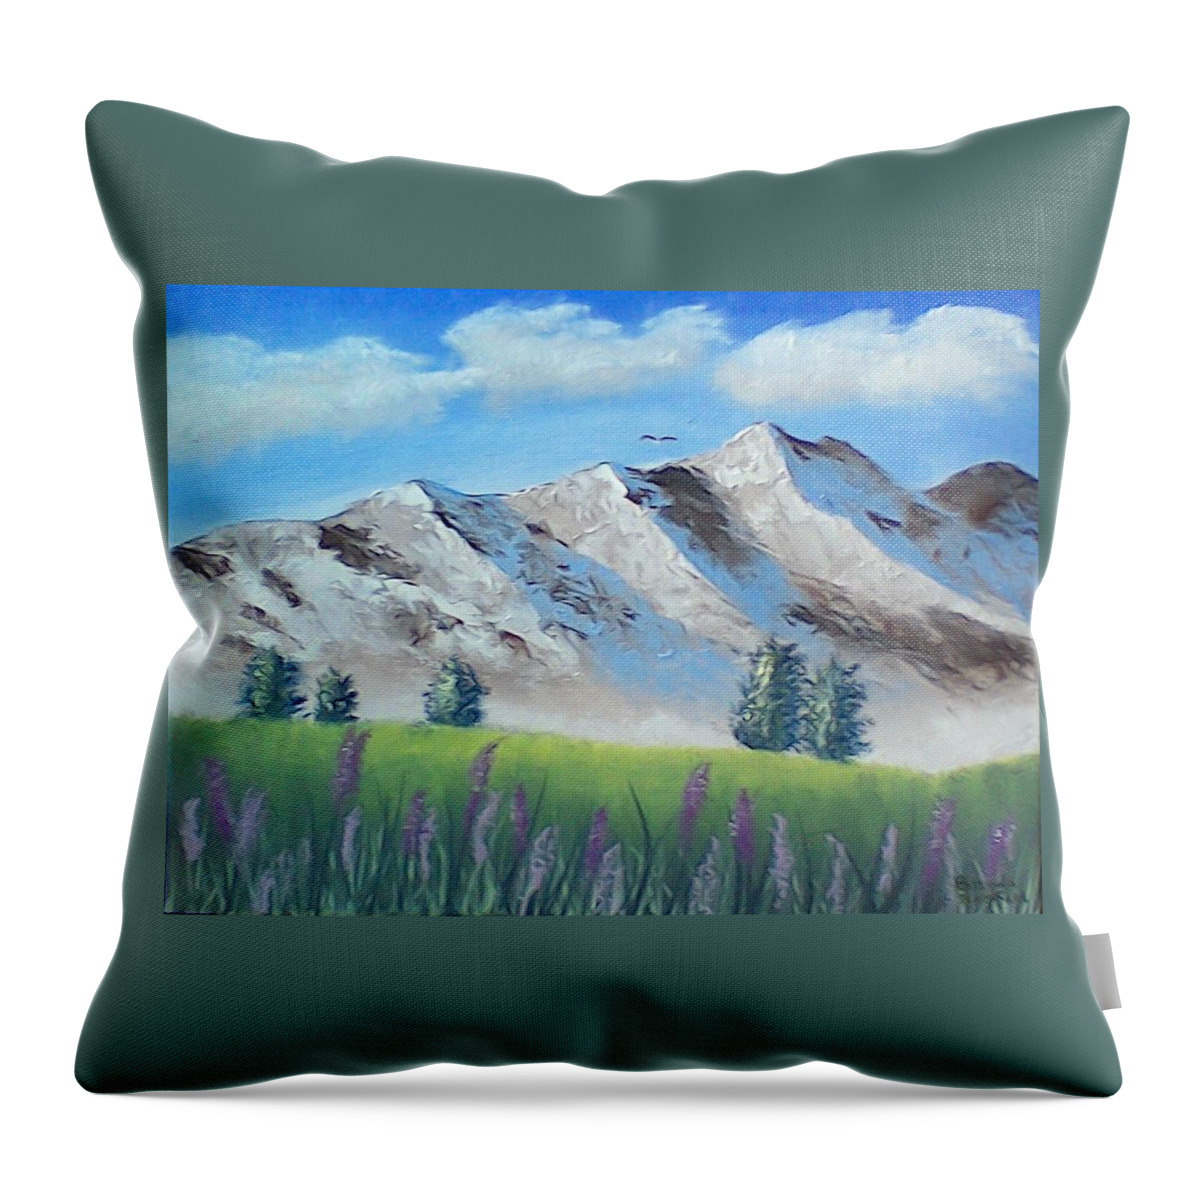 Mountains Throw Pillow featuring the painting Mountains by Brenda Bonfield